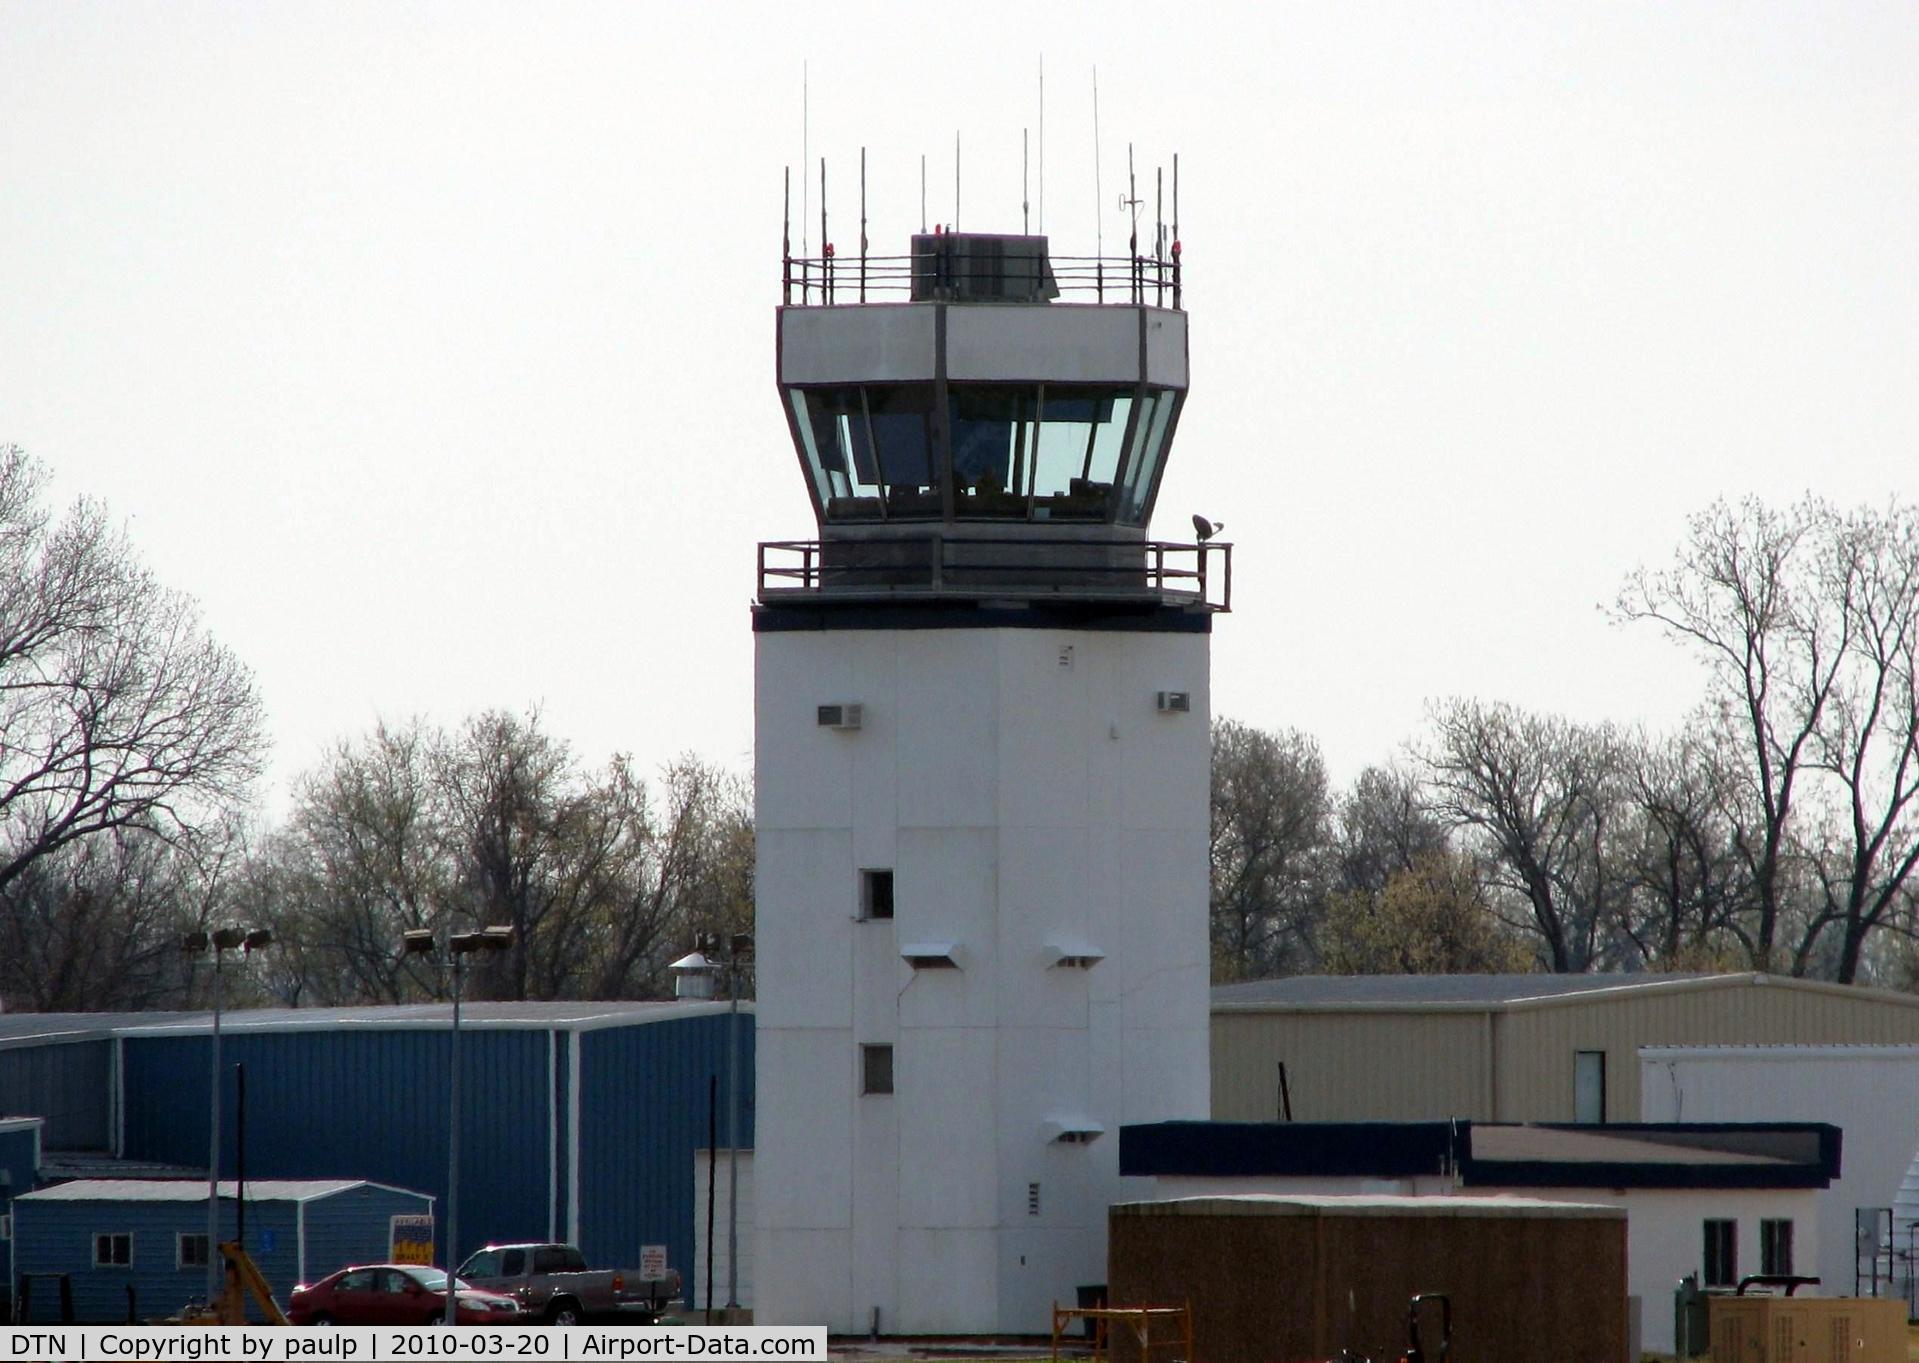 Shreveport Downtown Airport (DTN) - The Tower at Shreveport's Downtown Airport.